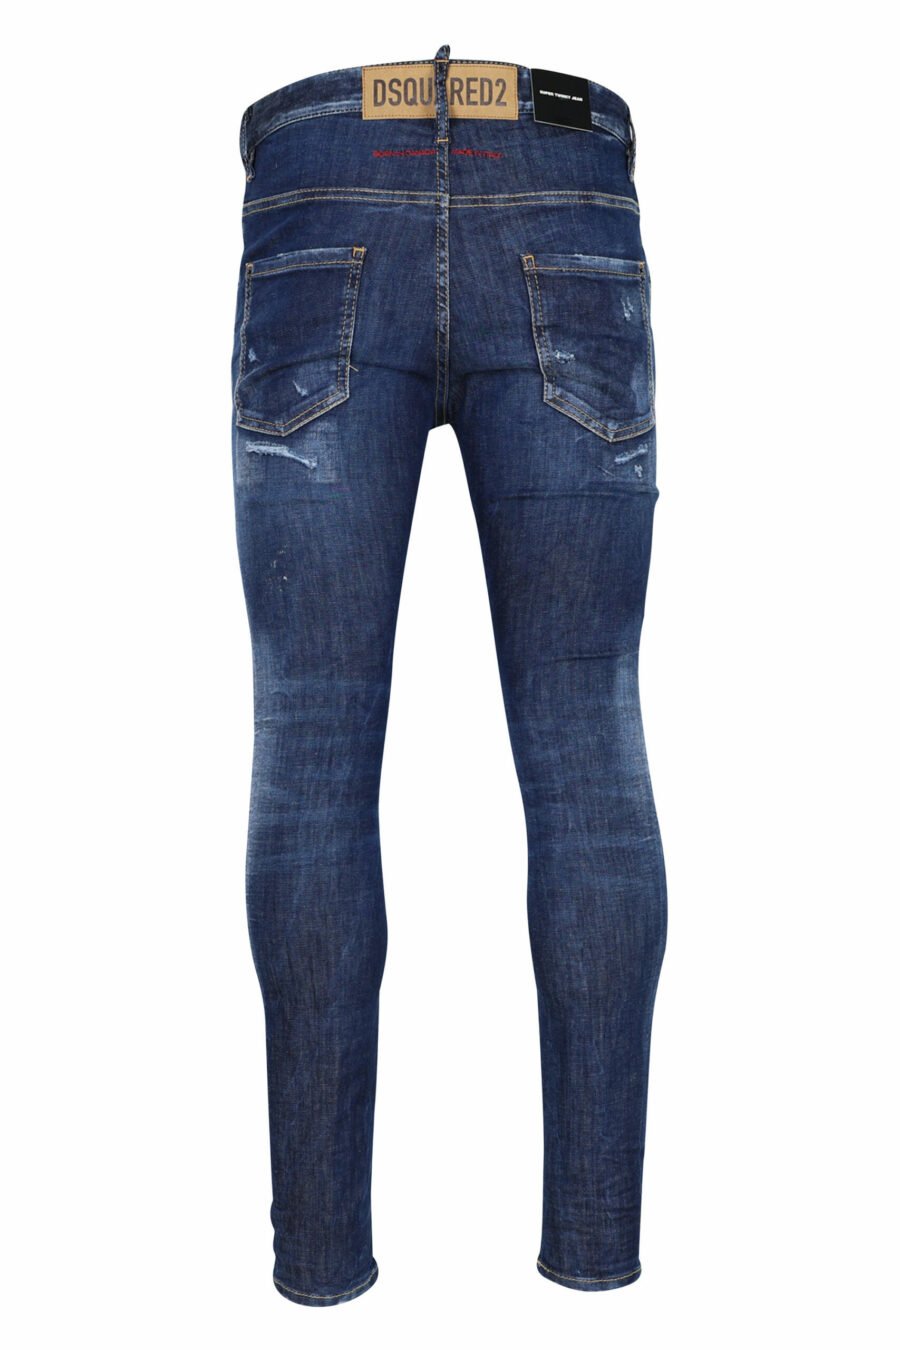 Blue "super twinky jean" jeans with rips and frayed - 8054148106201 2 scaled